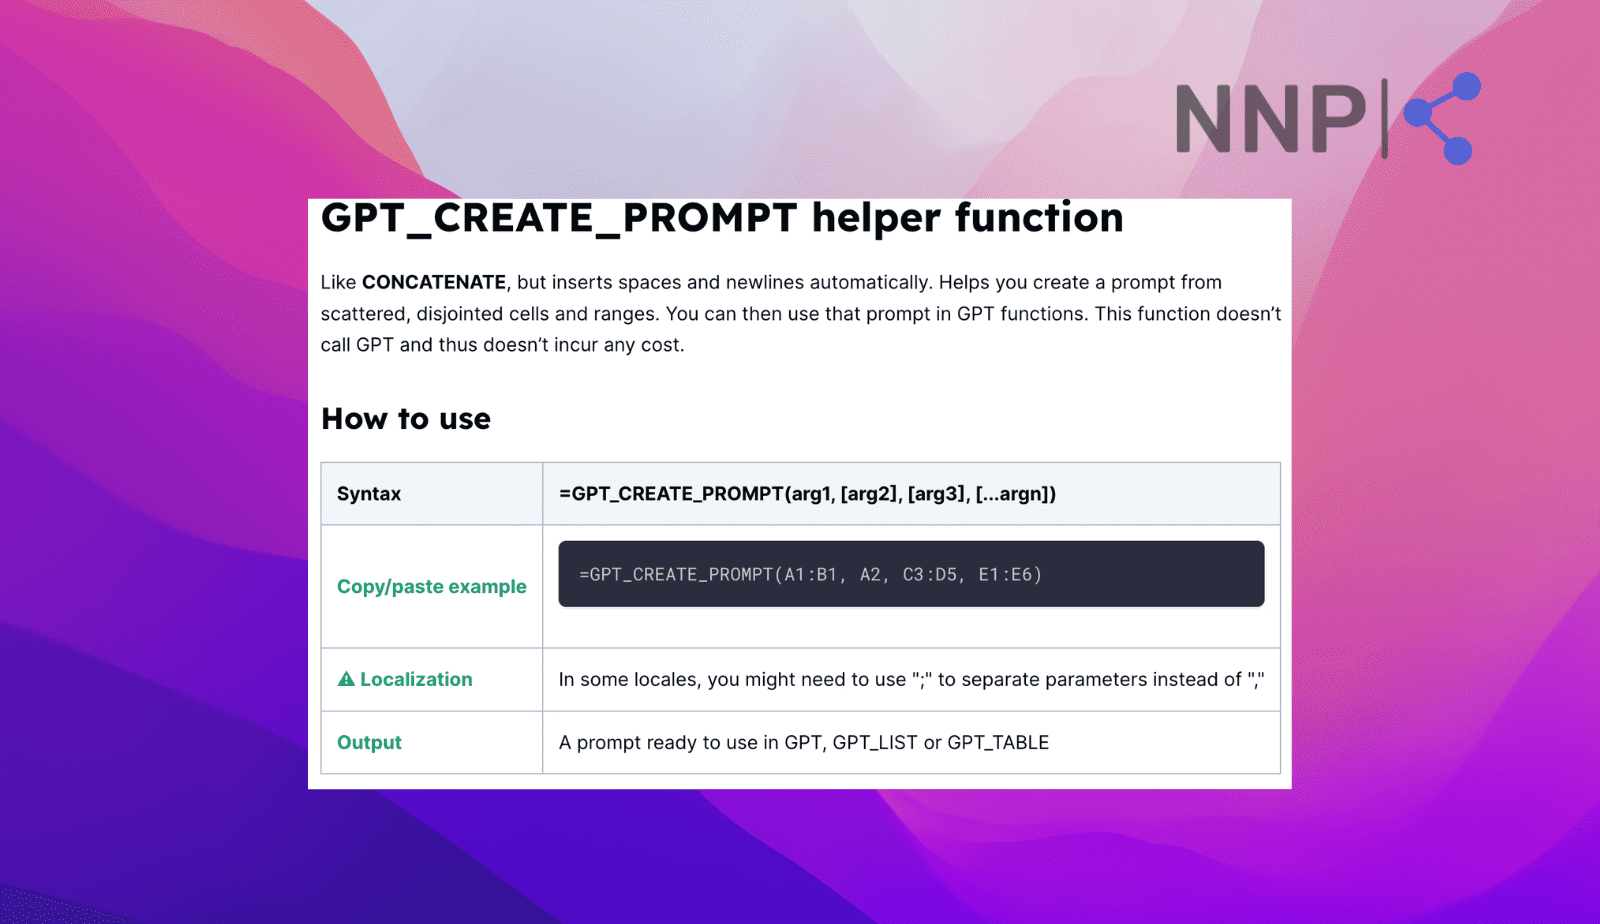 GET_PROMPT function